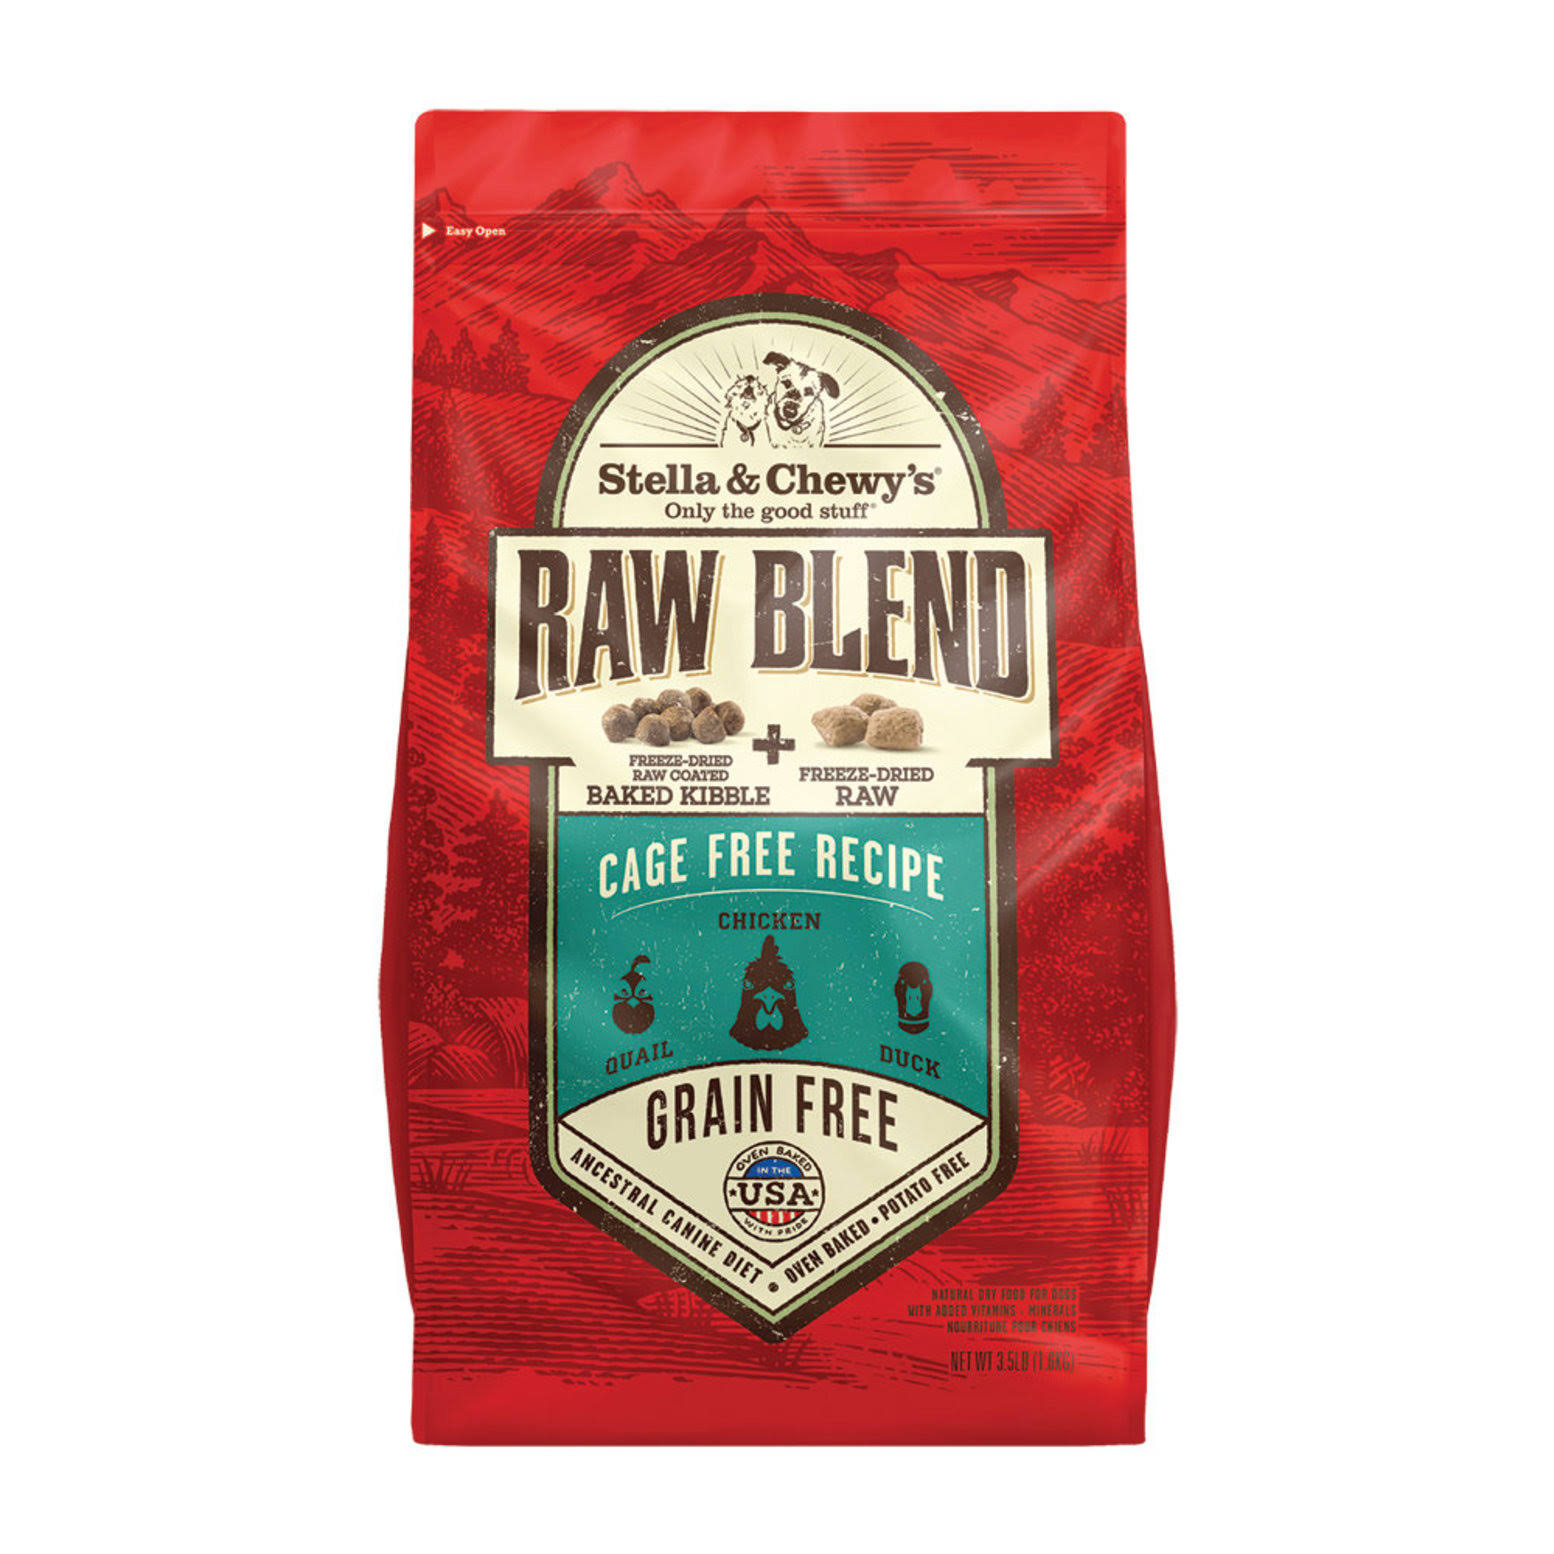 Stella & Chewy's Raw Blend Cage Free Recipe Dog Food 10lb